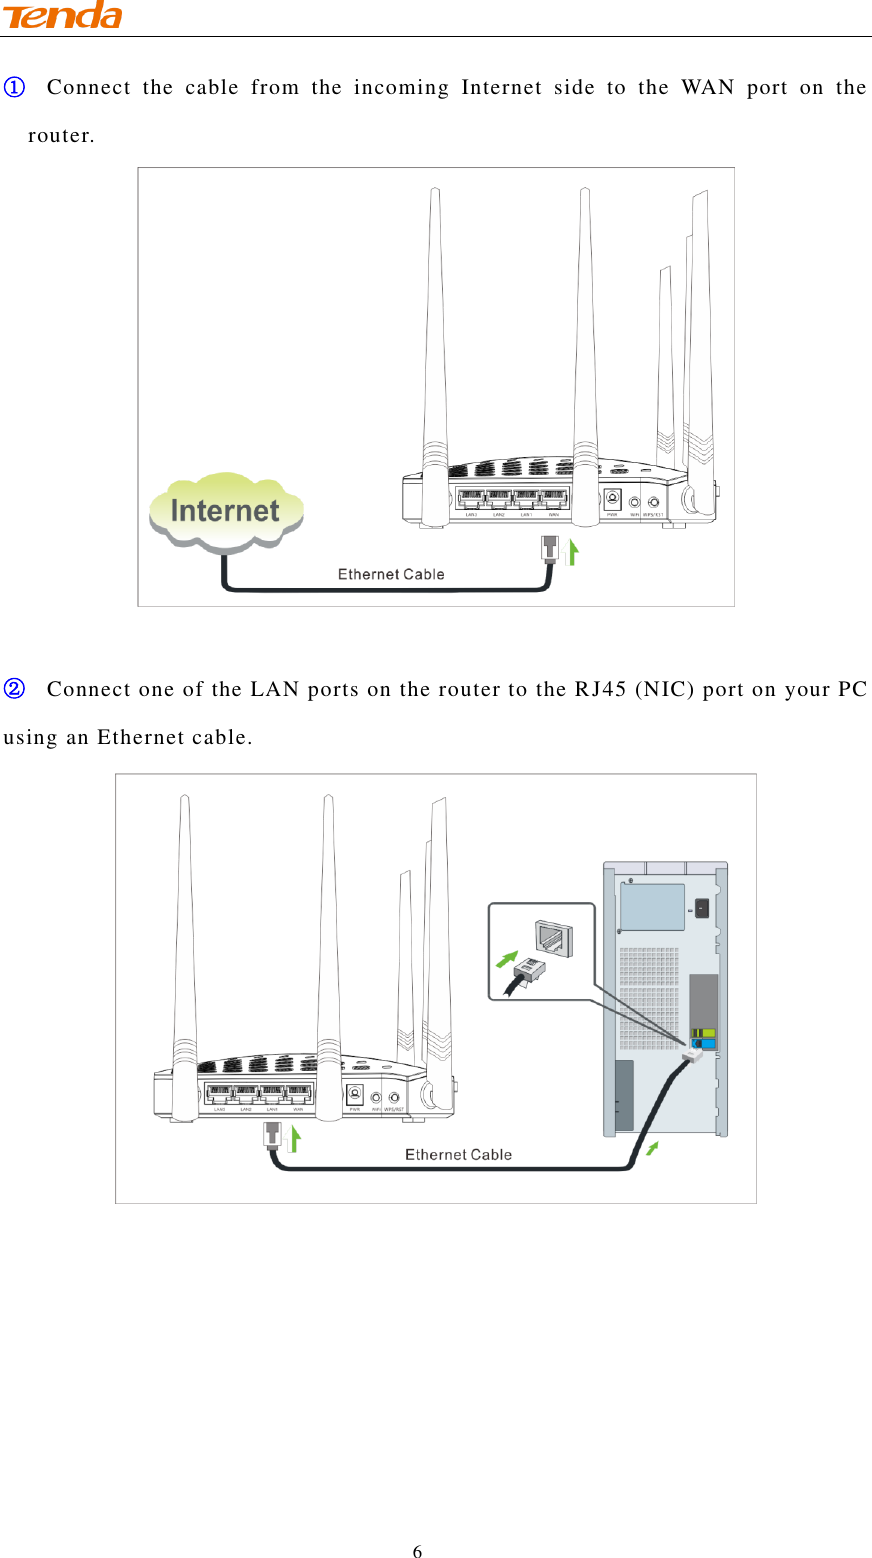                                    6 ① Connect  the  cable  from  the  incoming  Internet  side  to  the  WAN  port  on  the router.   ② Connect one of the LAN ports on the router to the RJ45 (NIC) port on your PC using an Ethernet cable.  